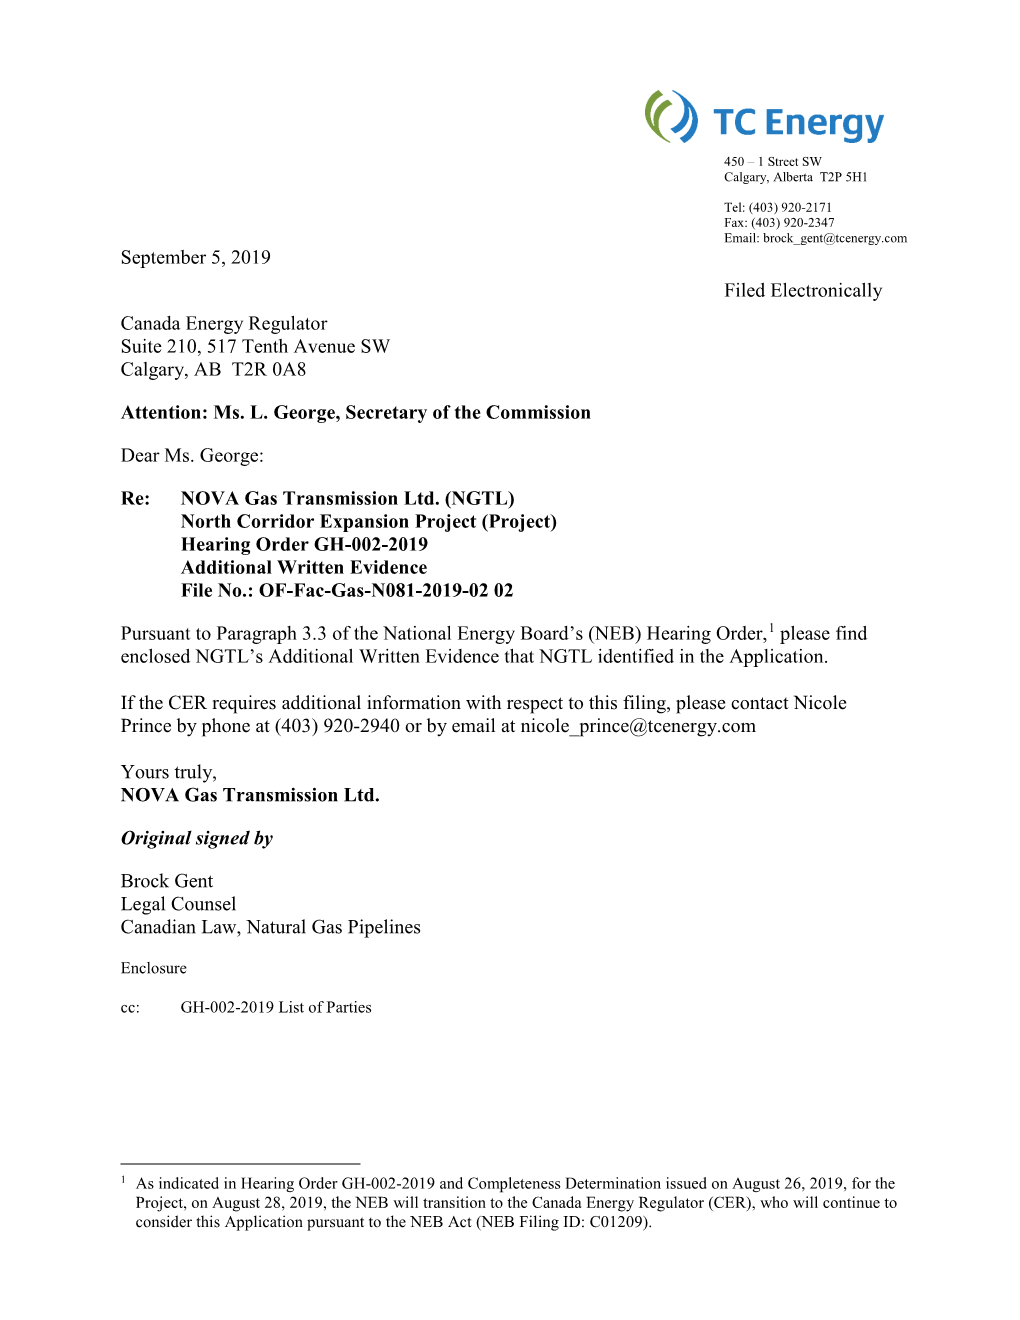 September 5, 2019 Filed Electronically Canada Energy Regulator Suite 210, 517 Tenth Avenue SW Calgary, AB T2R 0A8